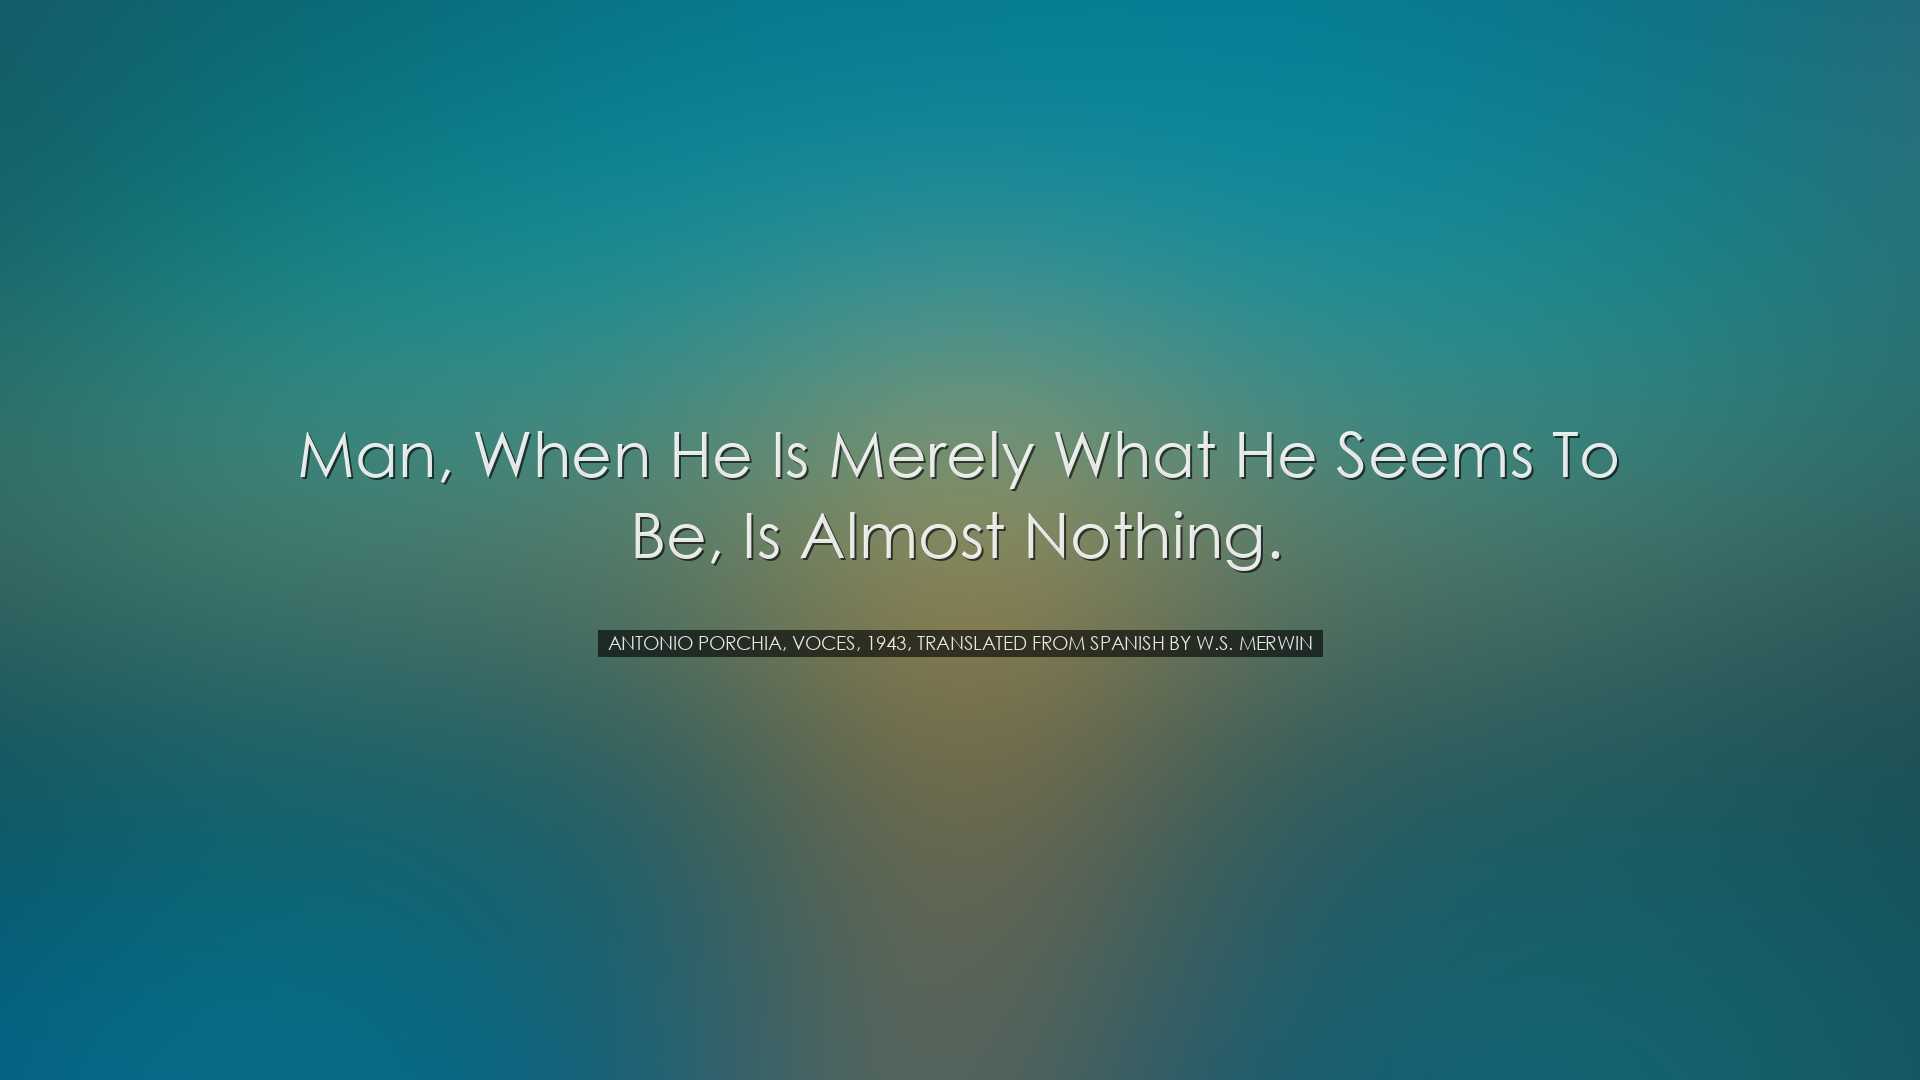 Man, when he is merely what he seems to be, is almost nothing. - A